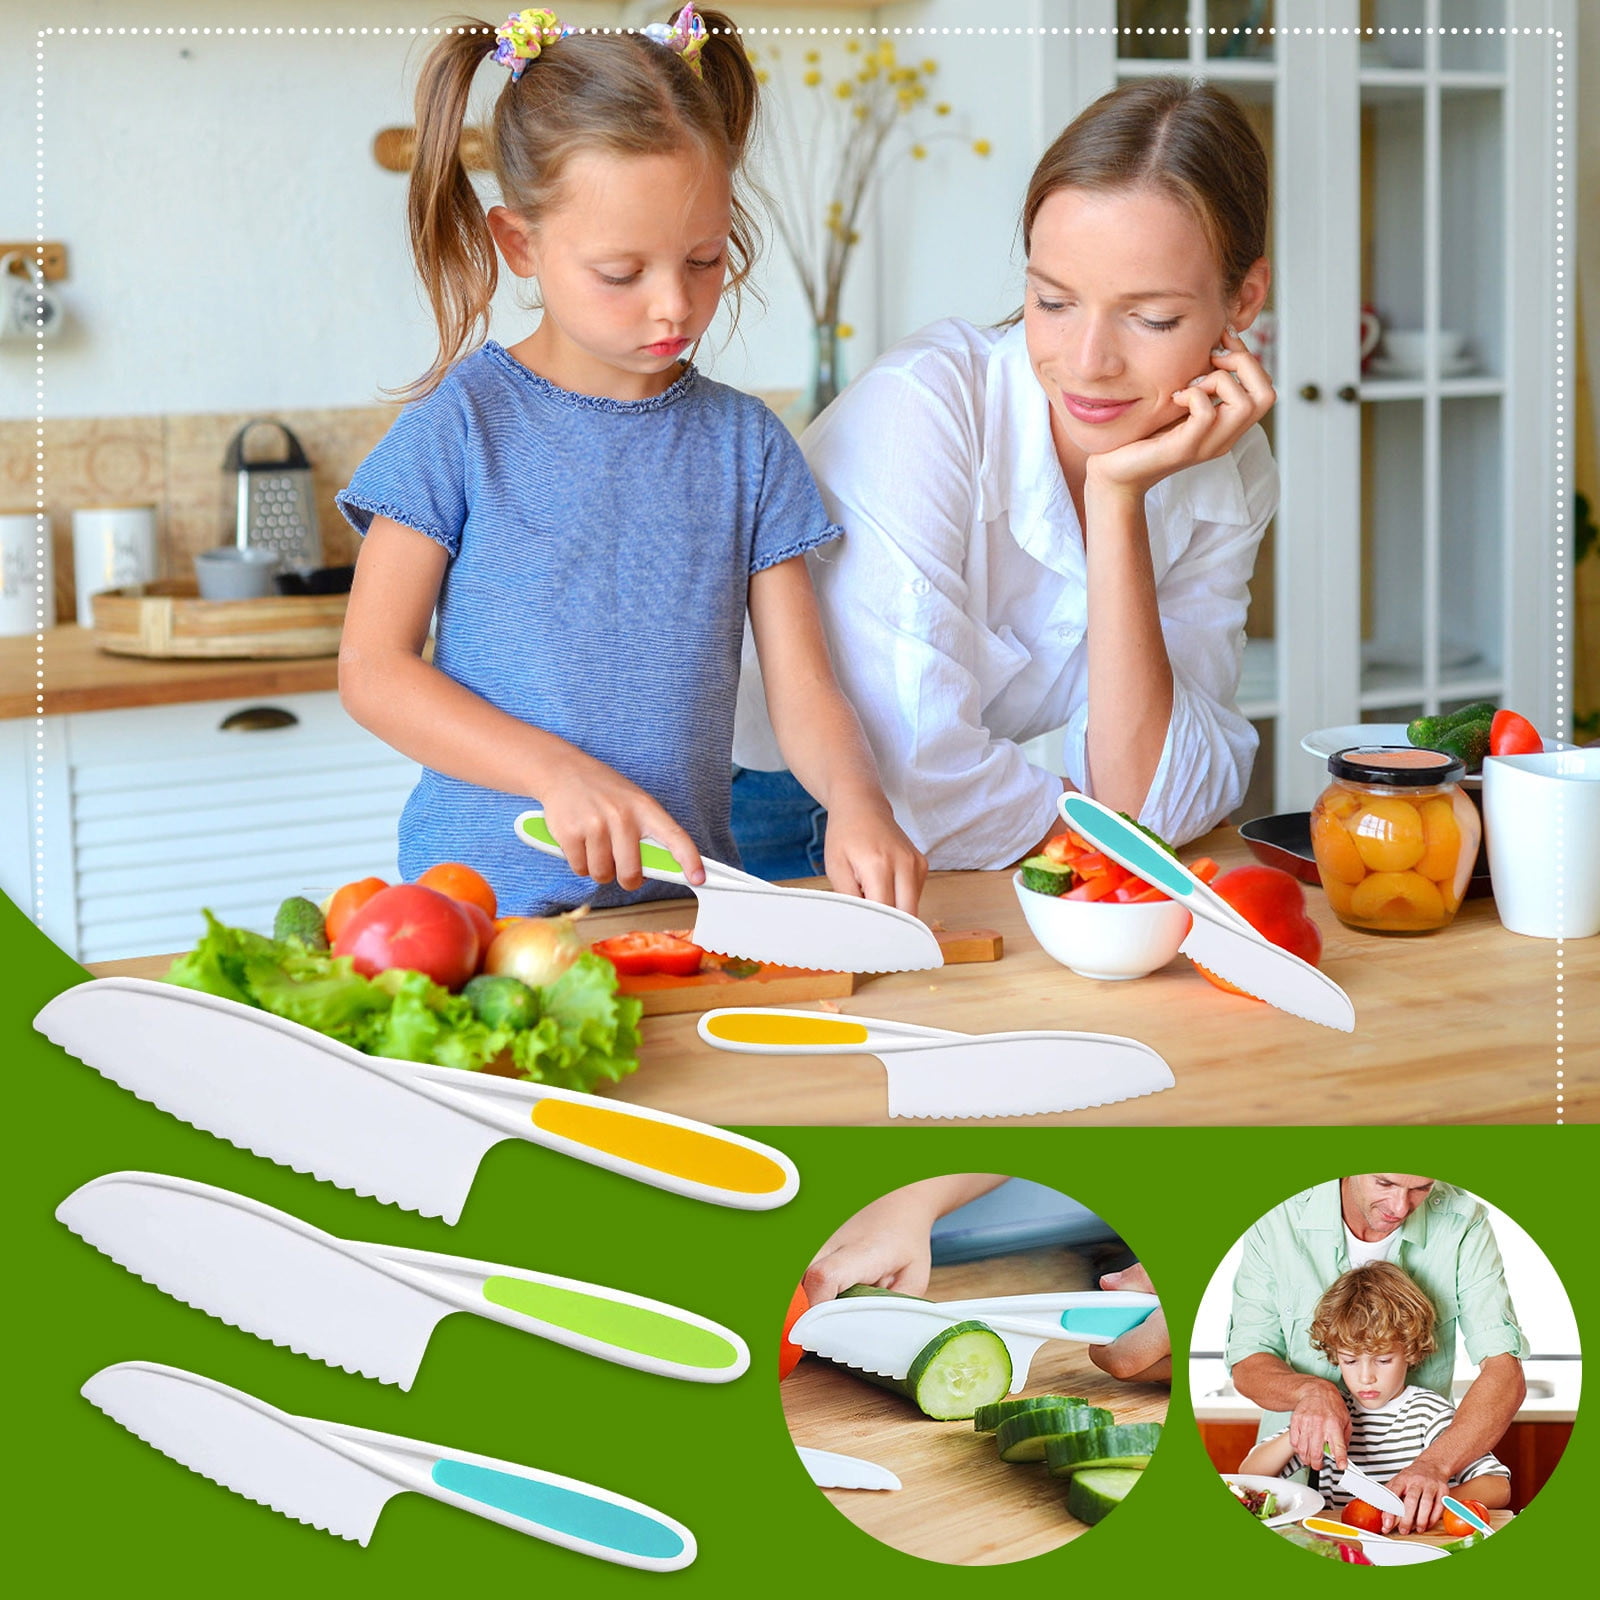 Zulay Kitchen Kids Knife Set for Cooking and Cutting - Green & White